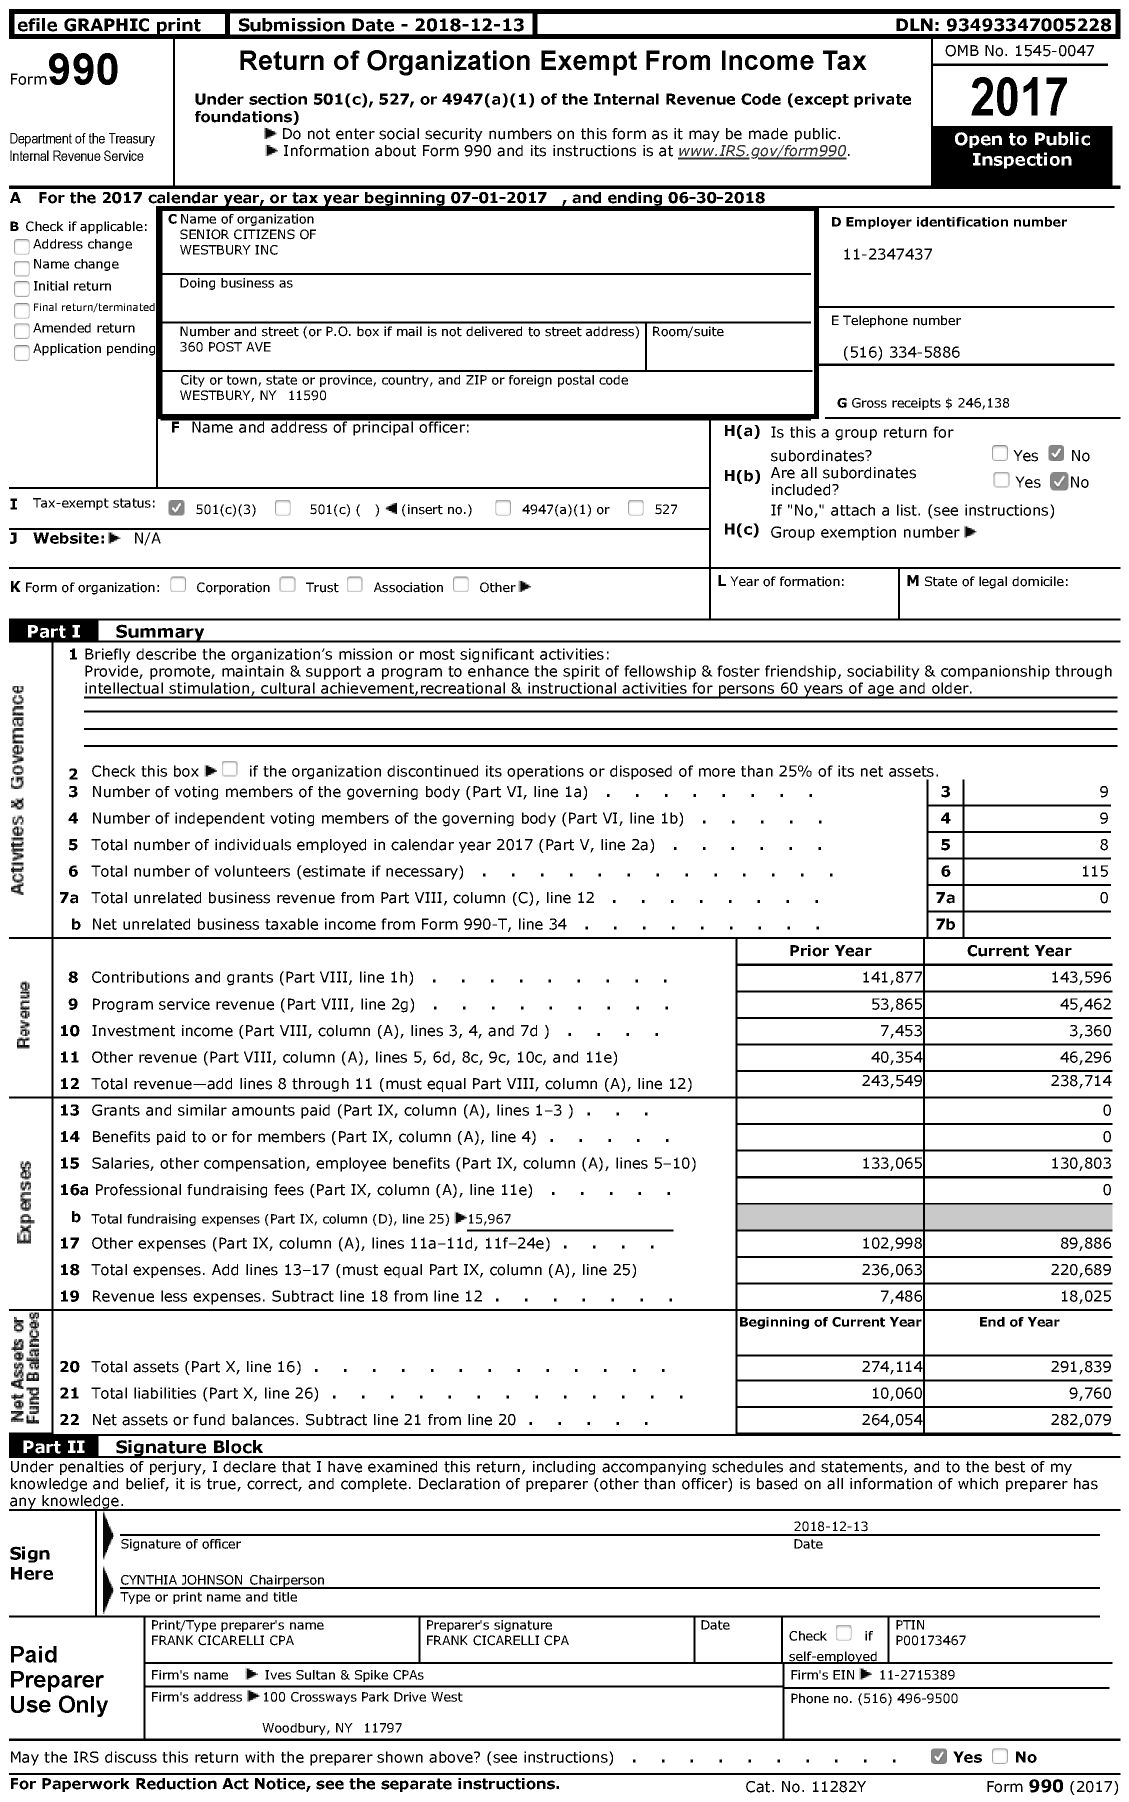 Image of first page of 2017 Form 990 for Senior Citizens of Westbury